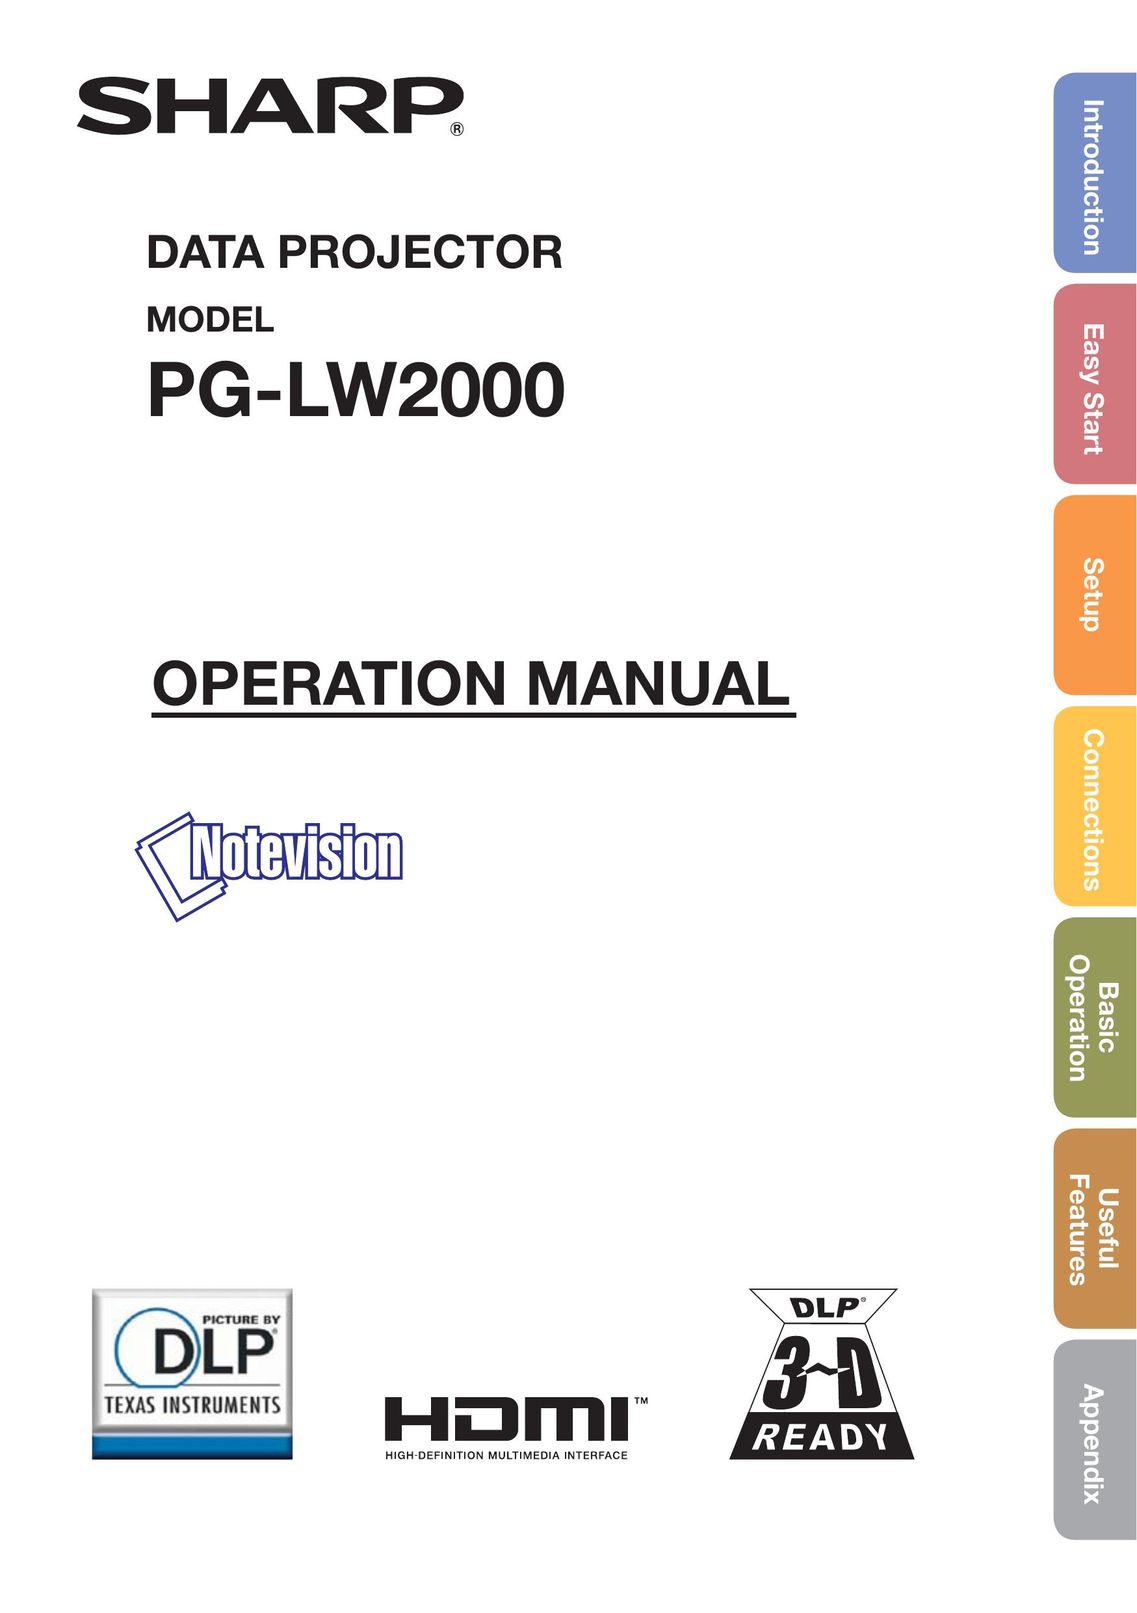 Sharp PG-LW2000 Projection Television User Manual